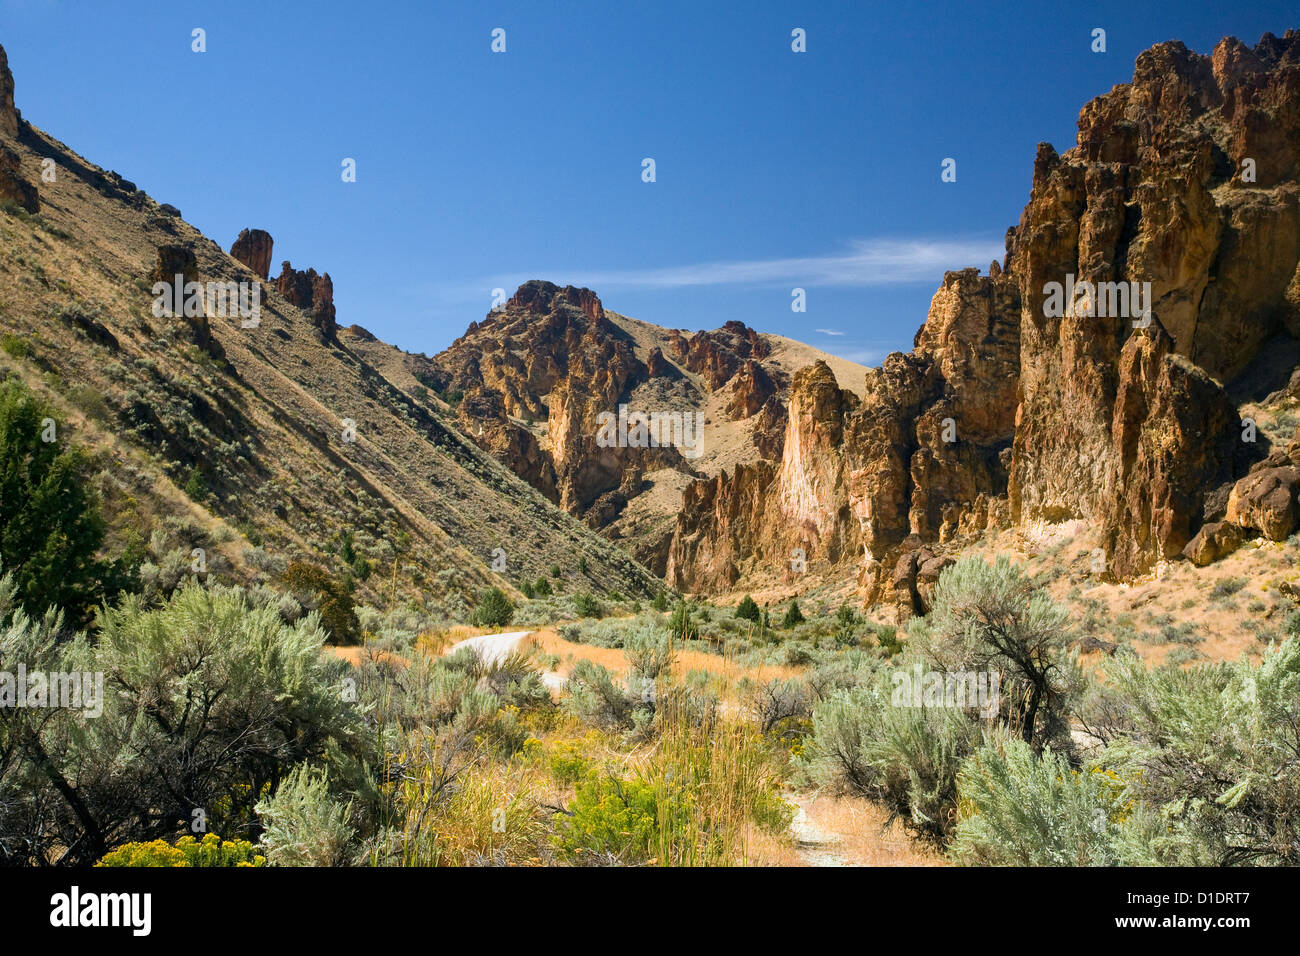 OR00898-00...OREGON - Spires and walls of weathered and eroded volcanic tuff in Leslie Gulch. Stock Photo